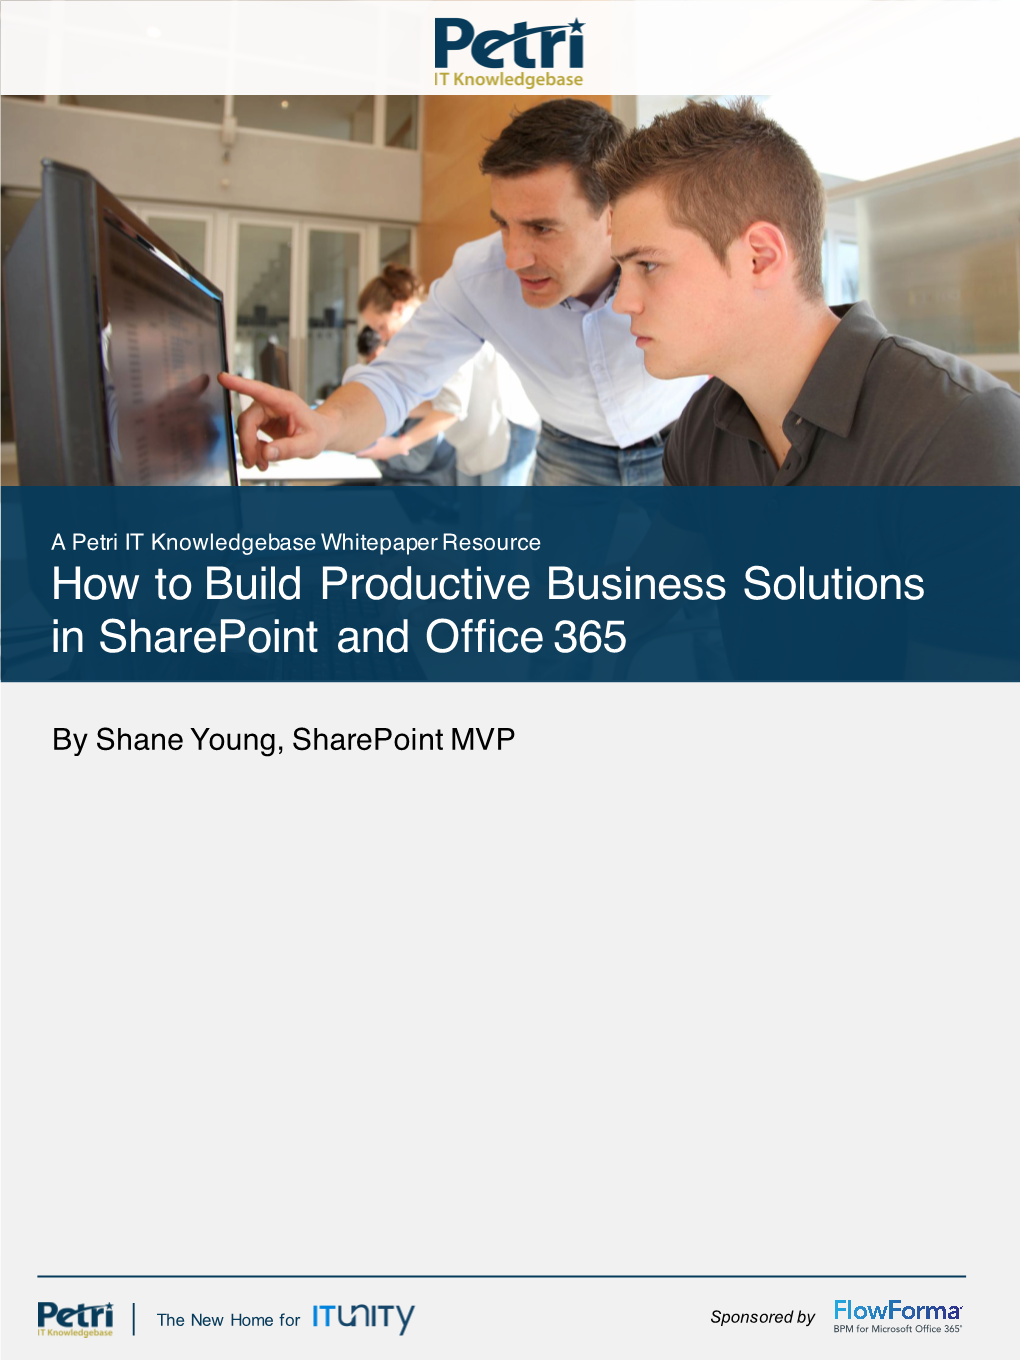 How to Build Productive Business Solutions in Sharepoint and Office 365